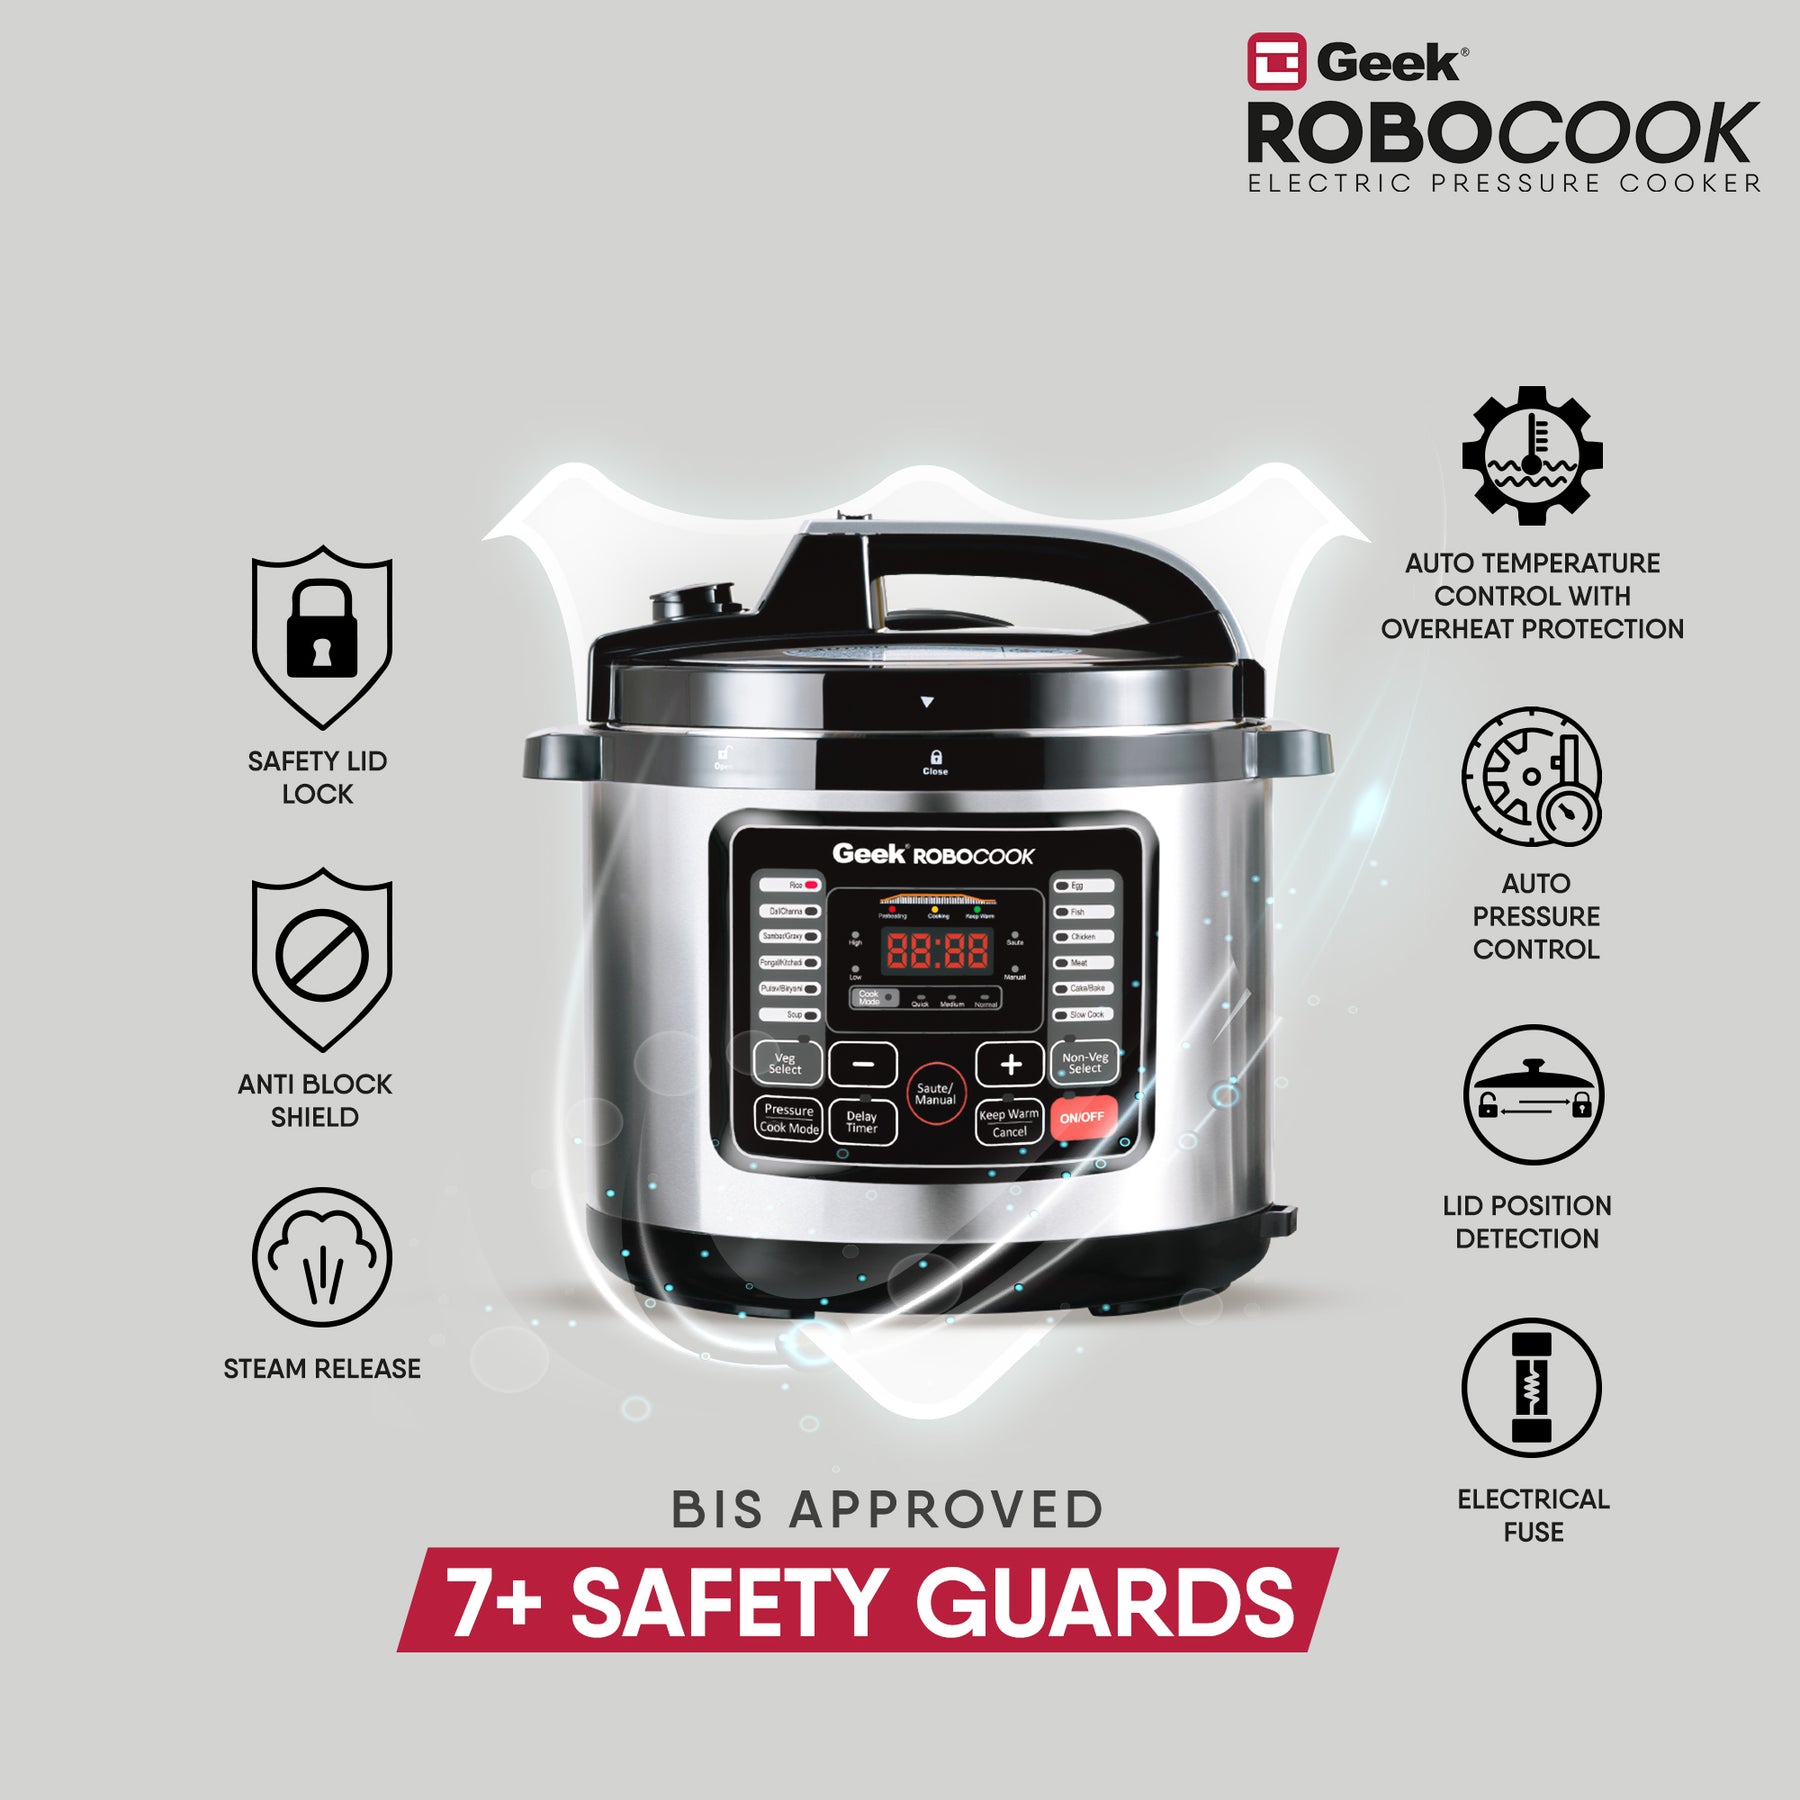 Geek Robocook Nuvo 8 Litre Electric Pressure Cooker with Stainless Steel Pot